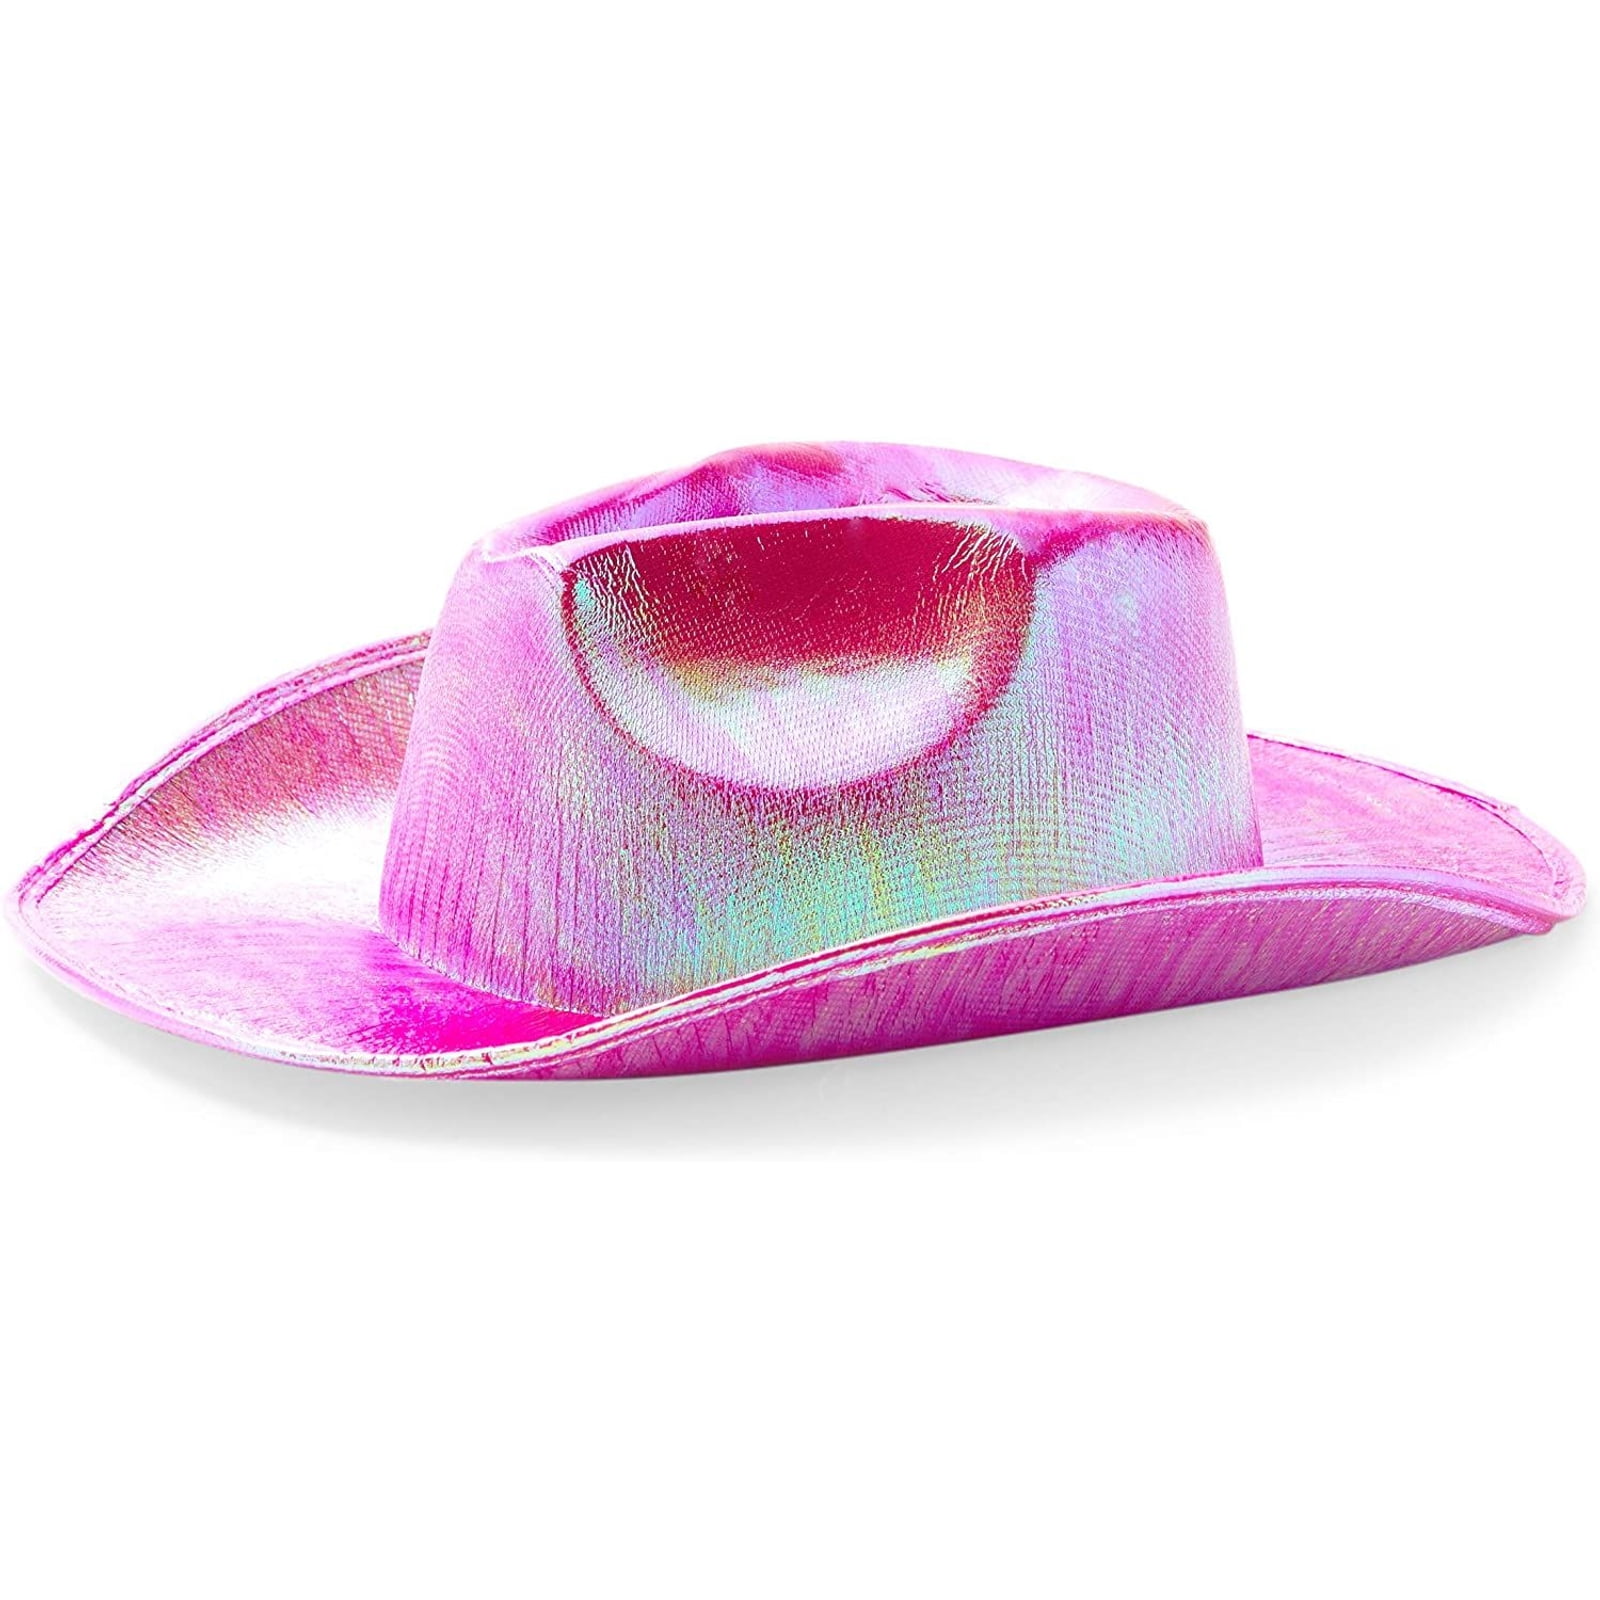 Iridescent Holographic Rave Bachelorette Party Metallic Space Cowgirl Cowboy Hat